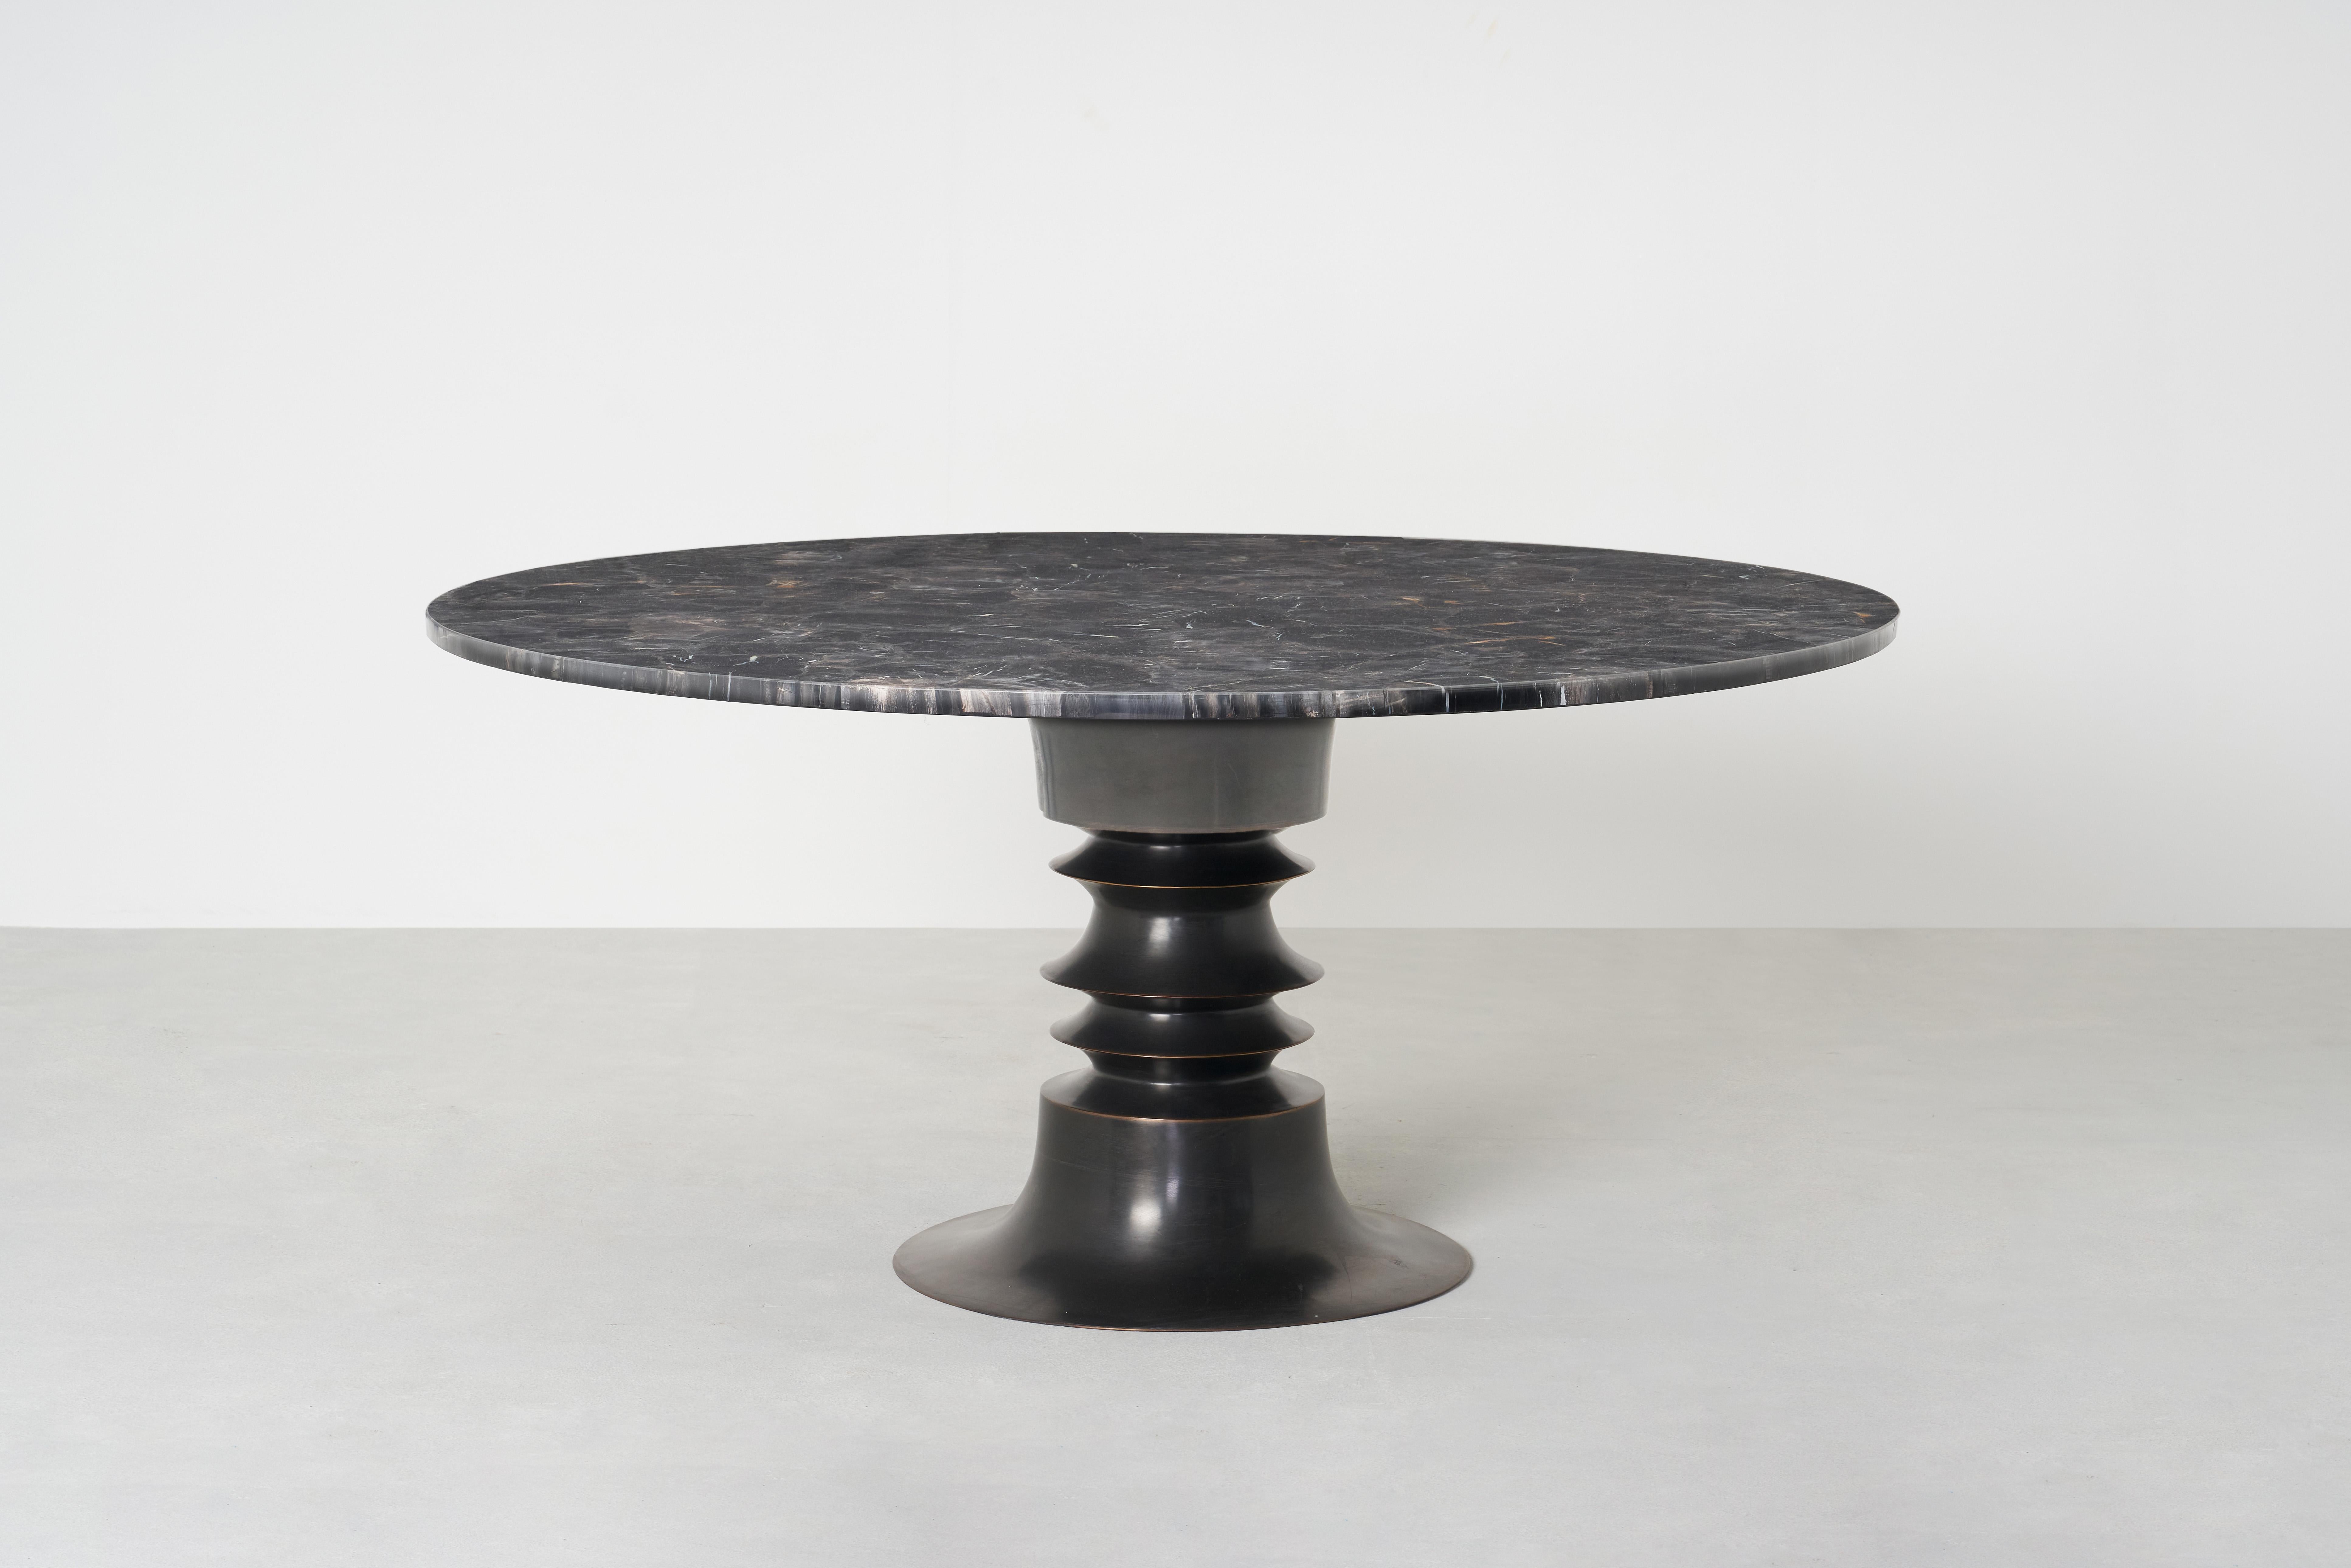 The ancient Indonesian temple of Borobudur lends the gentle curves of its famous stupas to this architectural table. Visual nuance is created through hammered sheets of tempered metal and tiers made from metal spinning.